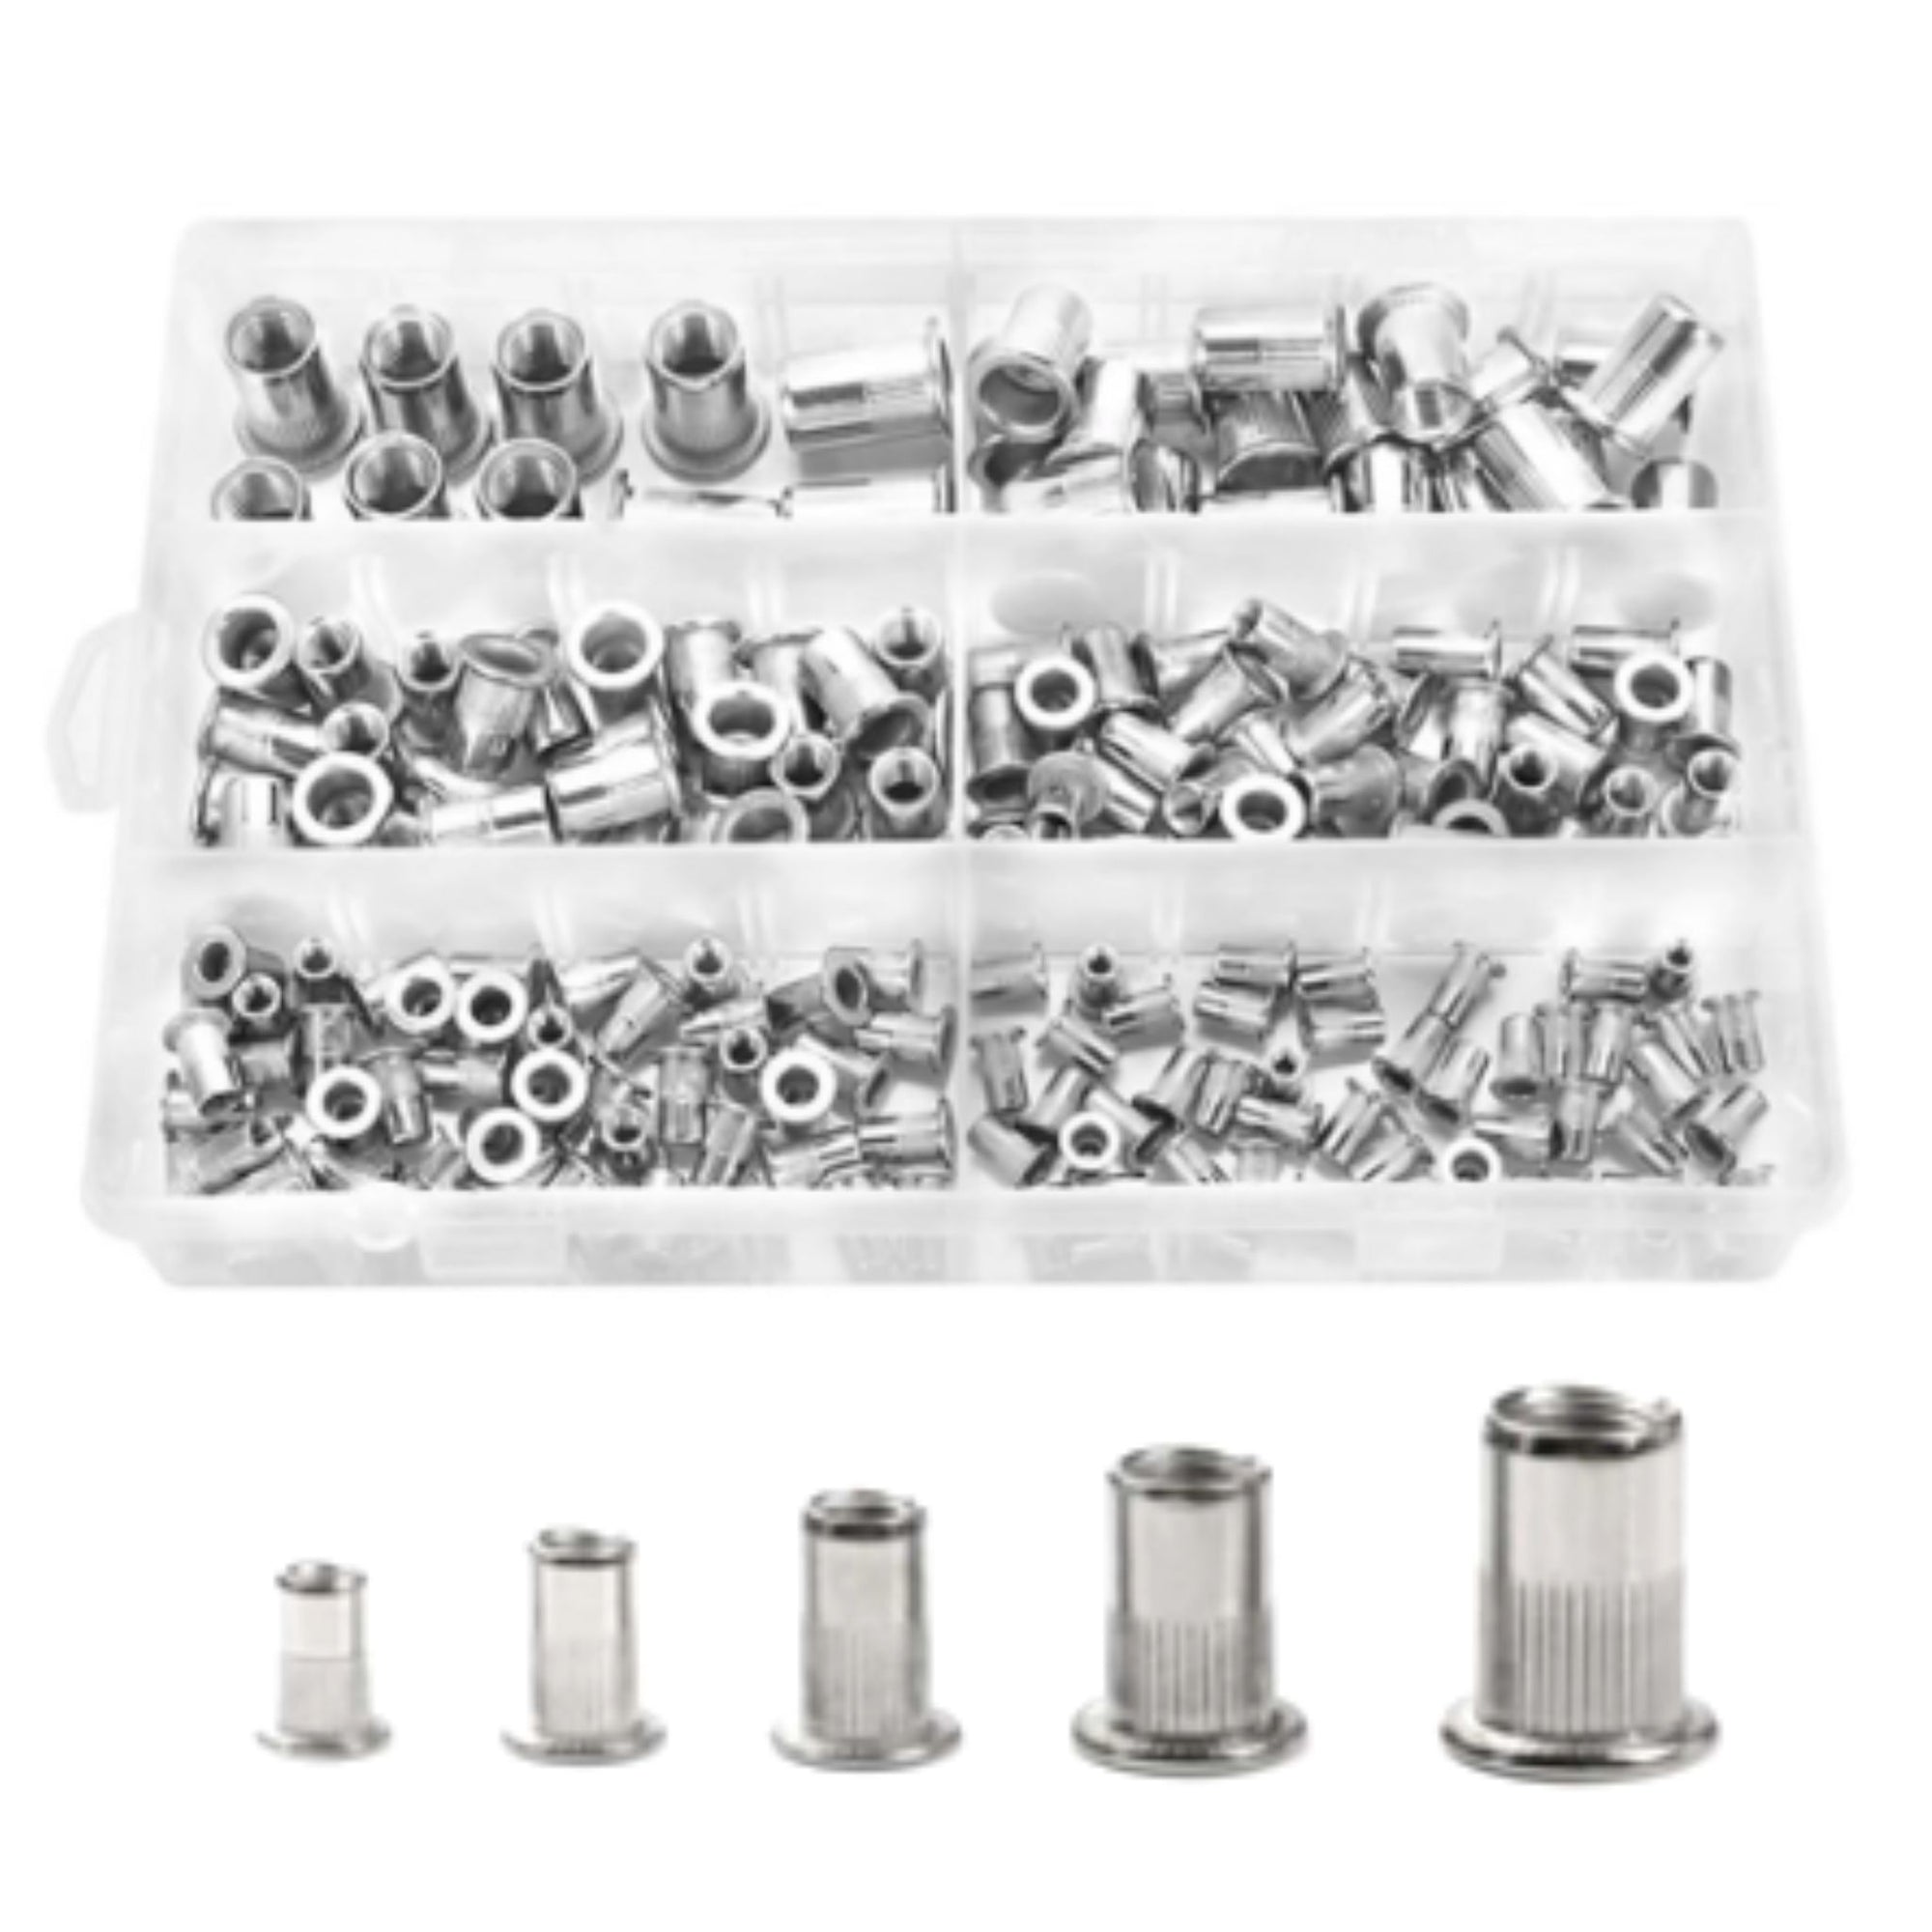 200 Piece Stainless Steel Rivet Nut Kit | M3 M4 M5 M6 M8 M10 - South East Clearance Centre